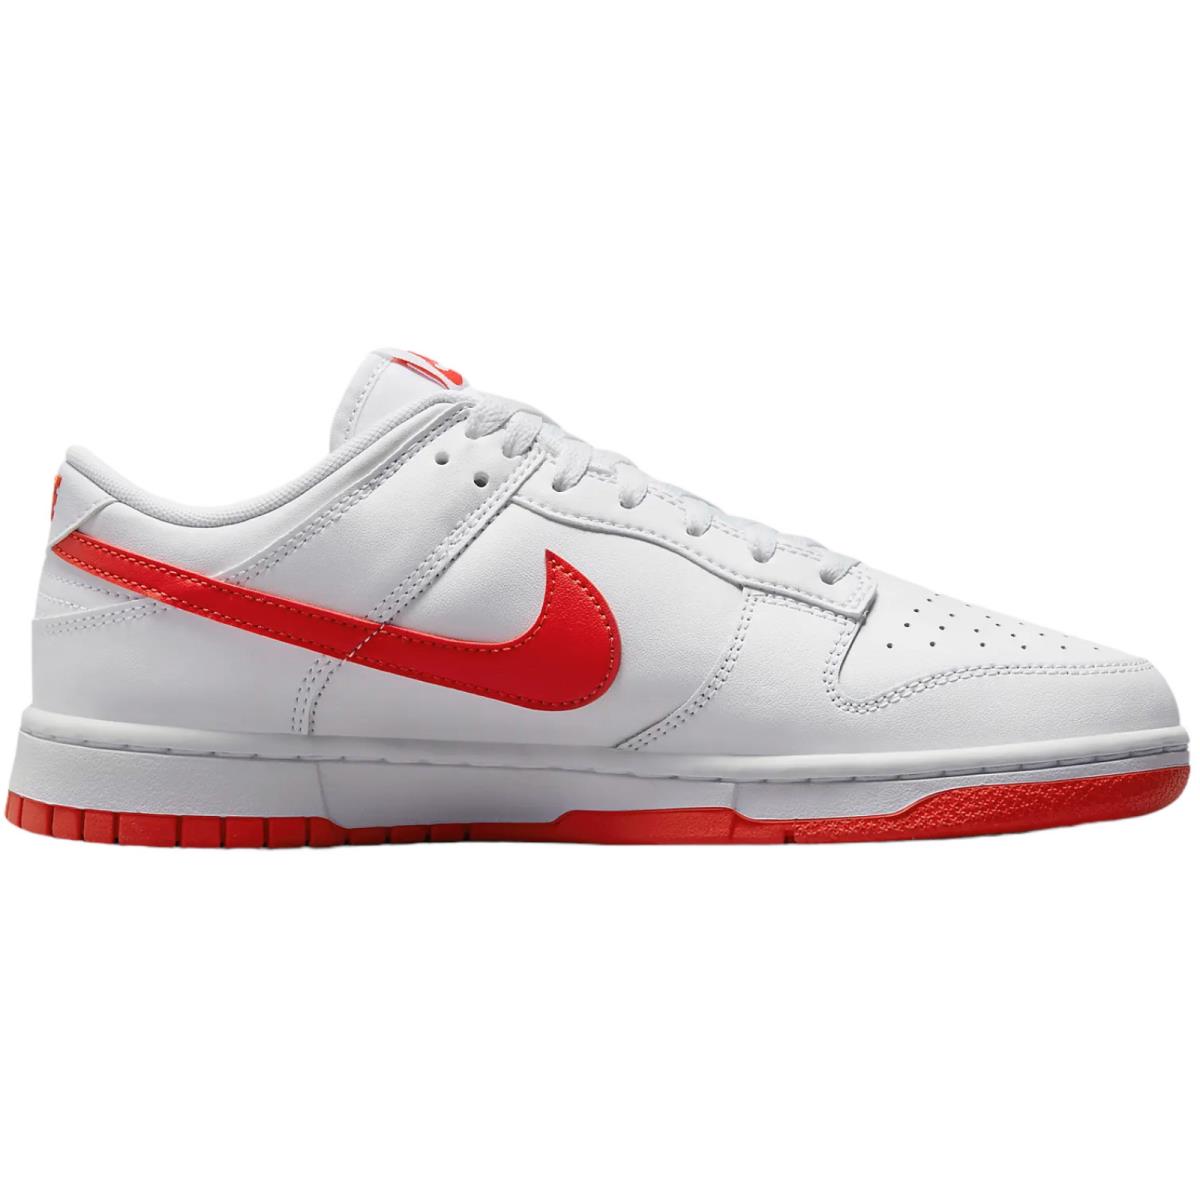 Nike Dunk Low Retro Men`s Casual Shoes All Colors US Sizes 7-14 White/Picante Red